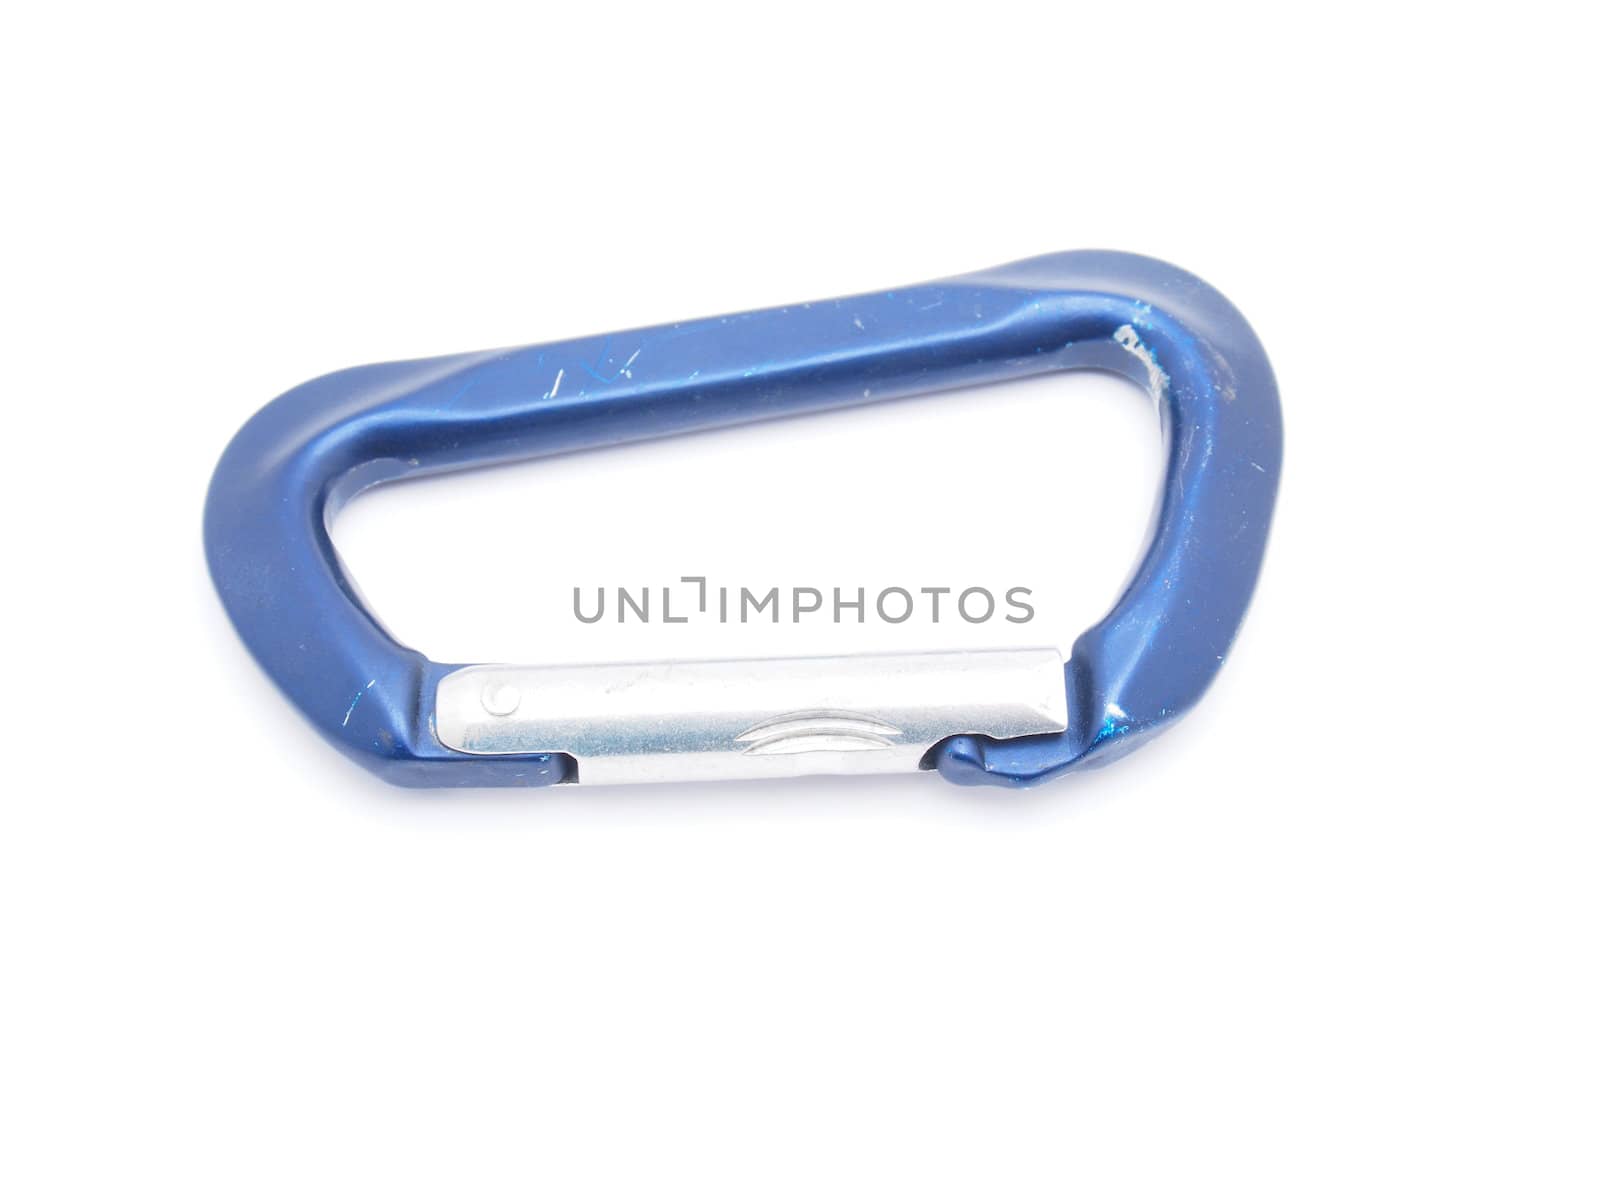 climbing carabiner on a white background